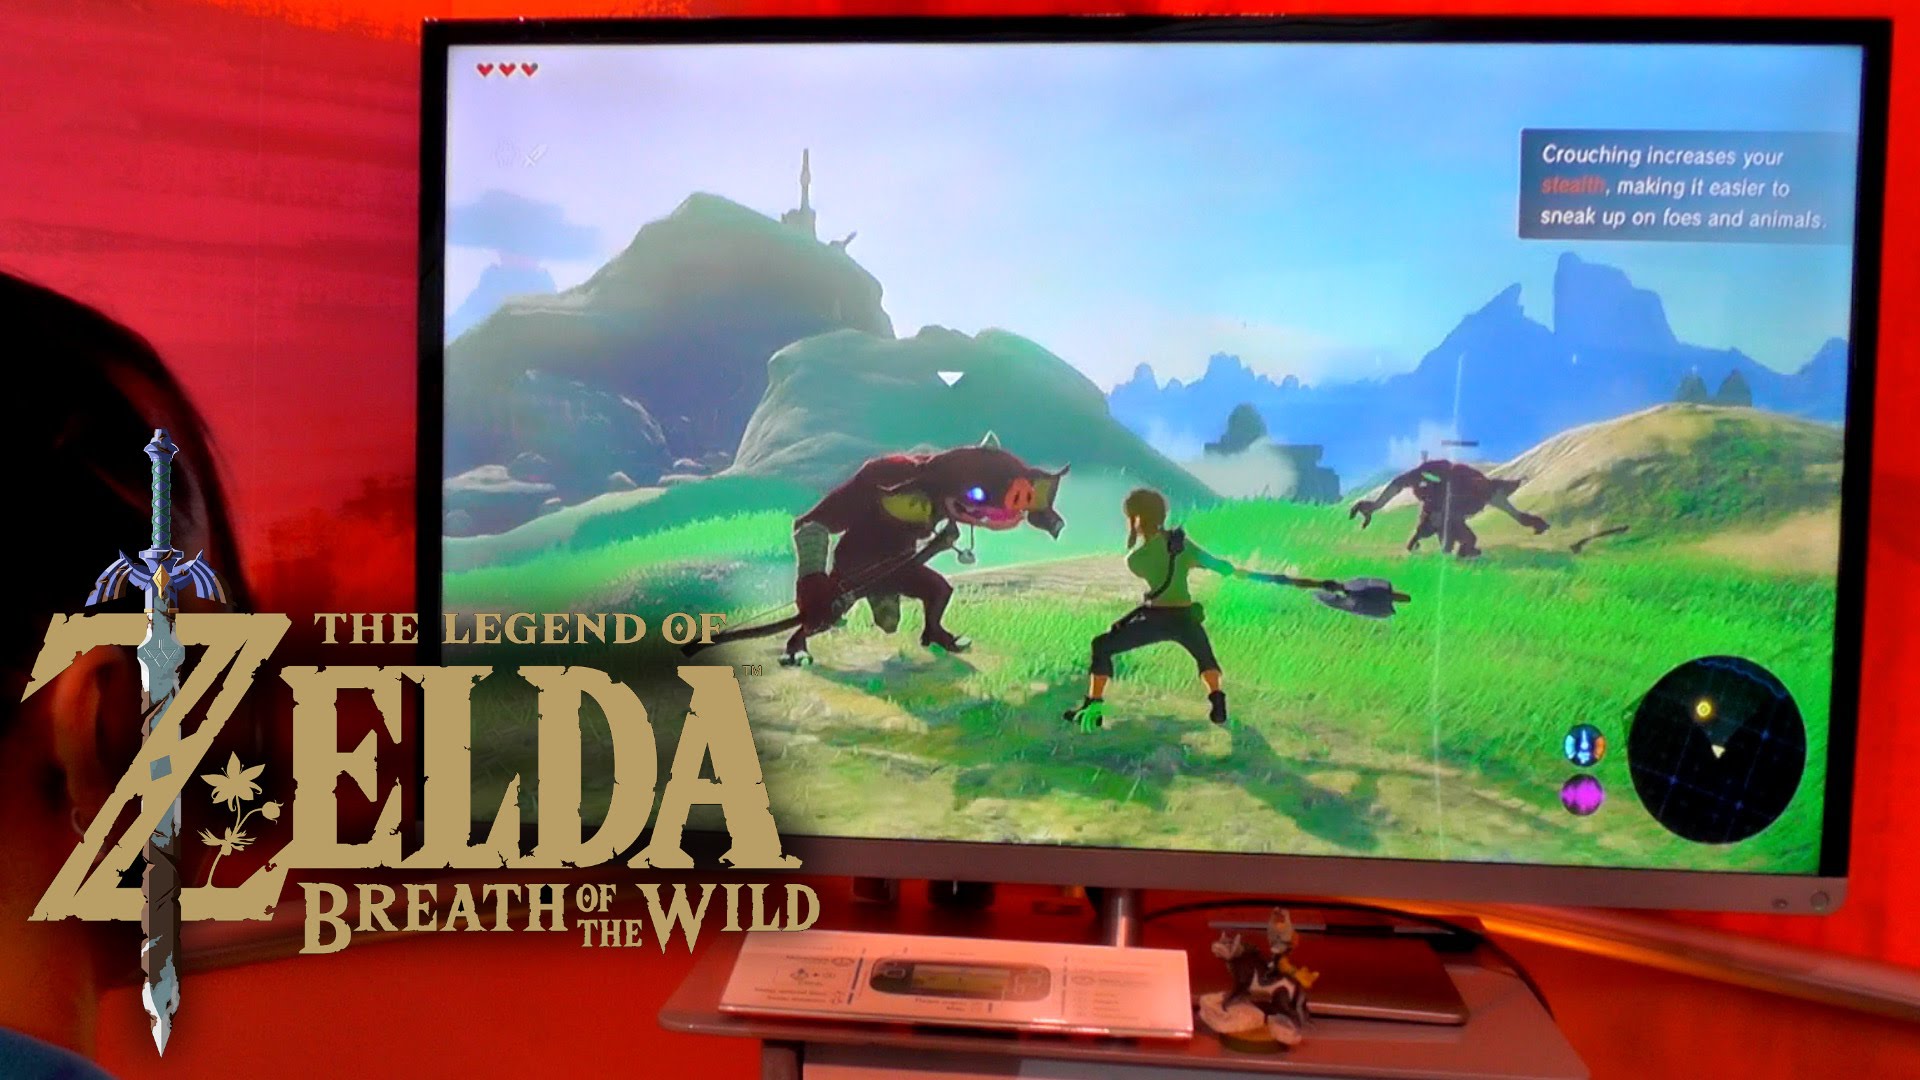 Zelda: Breath of the Wild – 15 Minutes of Story with Direct Sound